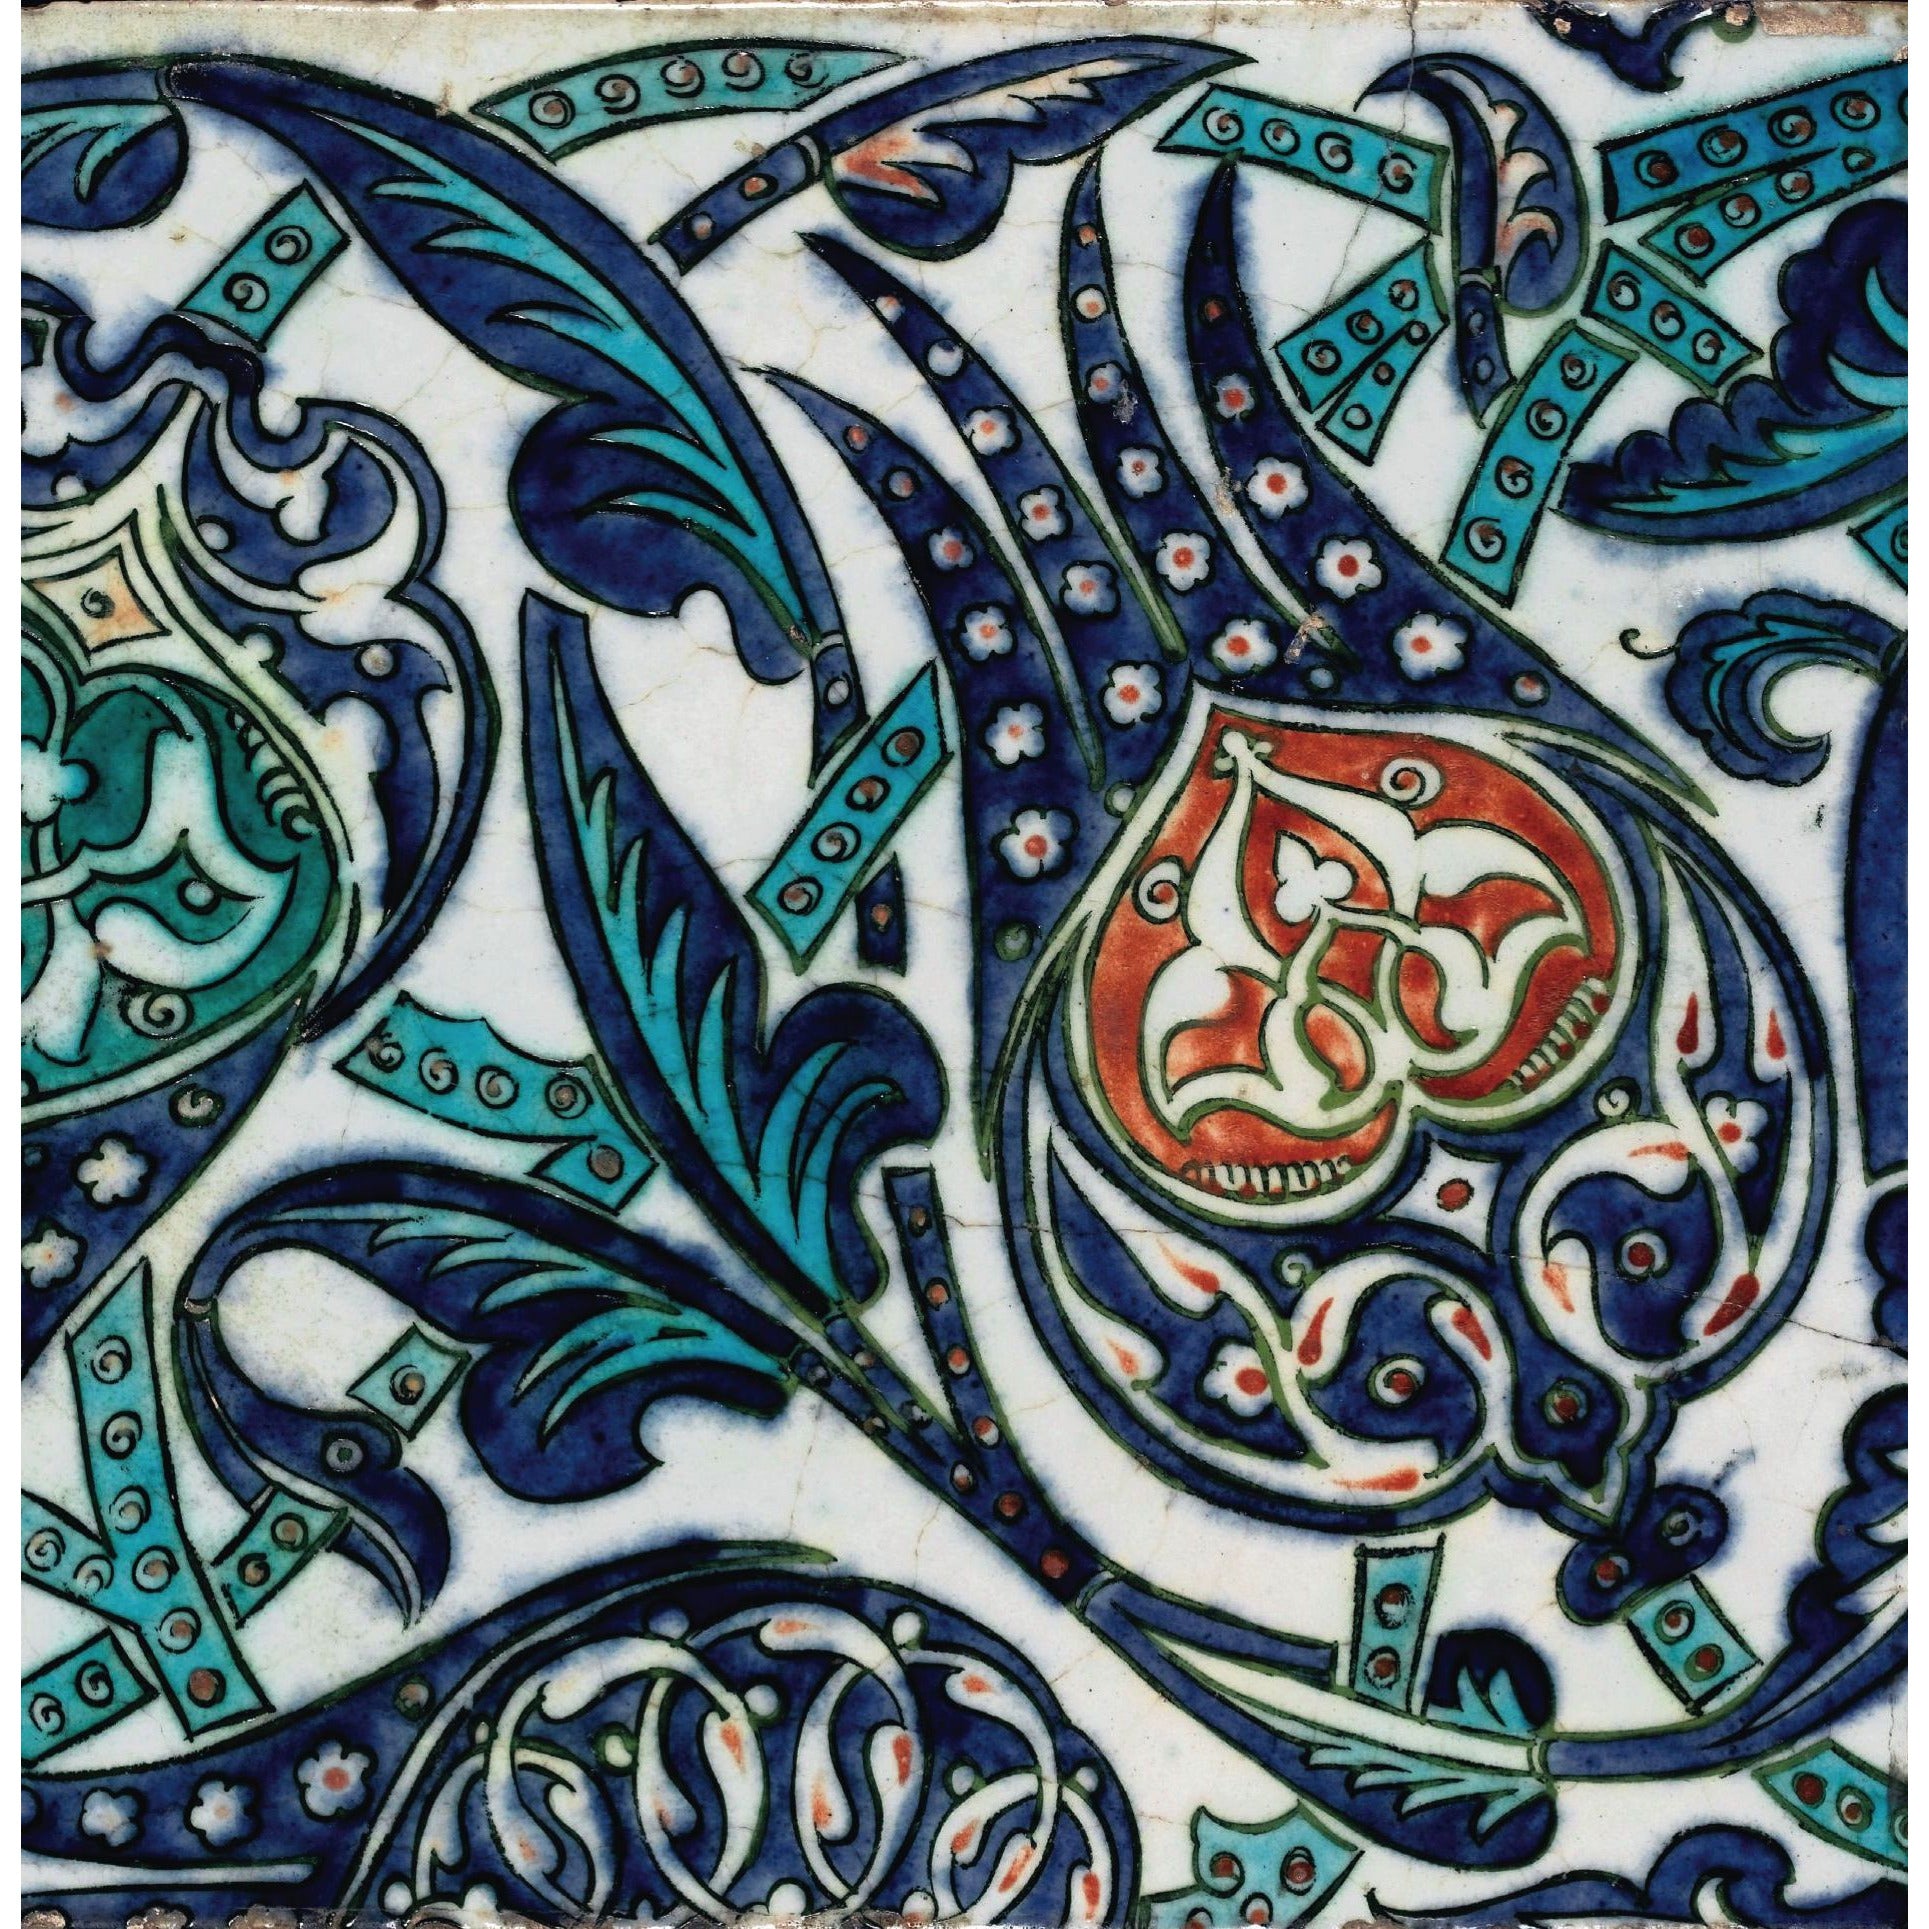 Square greeting card in the Iznik pottery style, with a large tulip design of blue and red on the right side, and stem and leaf patterns of blue and green behind and on the left. From the collection of The Fitzwilliam Museum, brought to you by CuratingCambridge.com